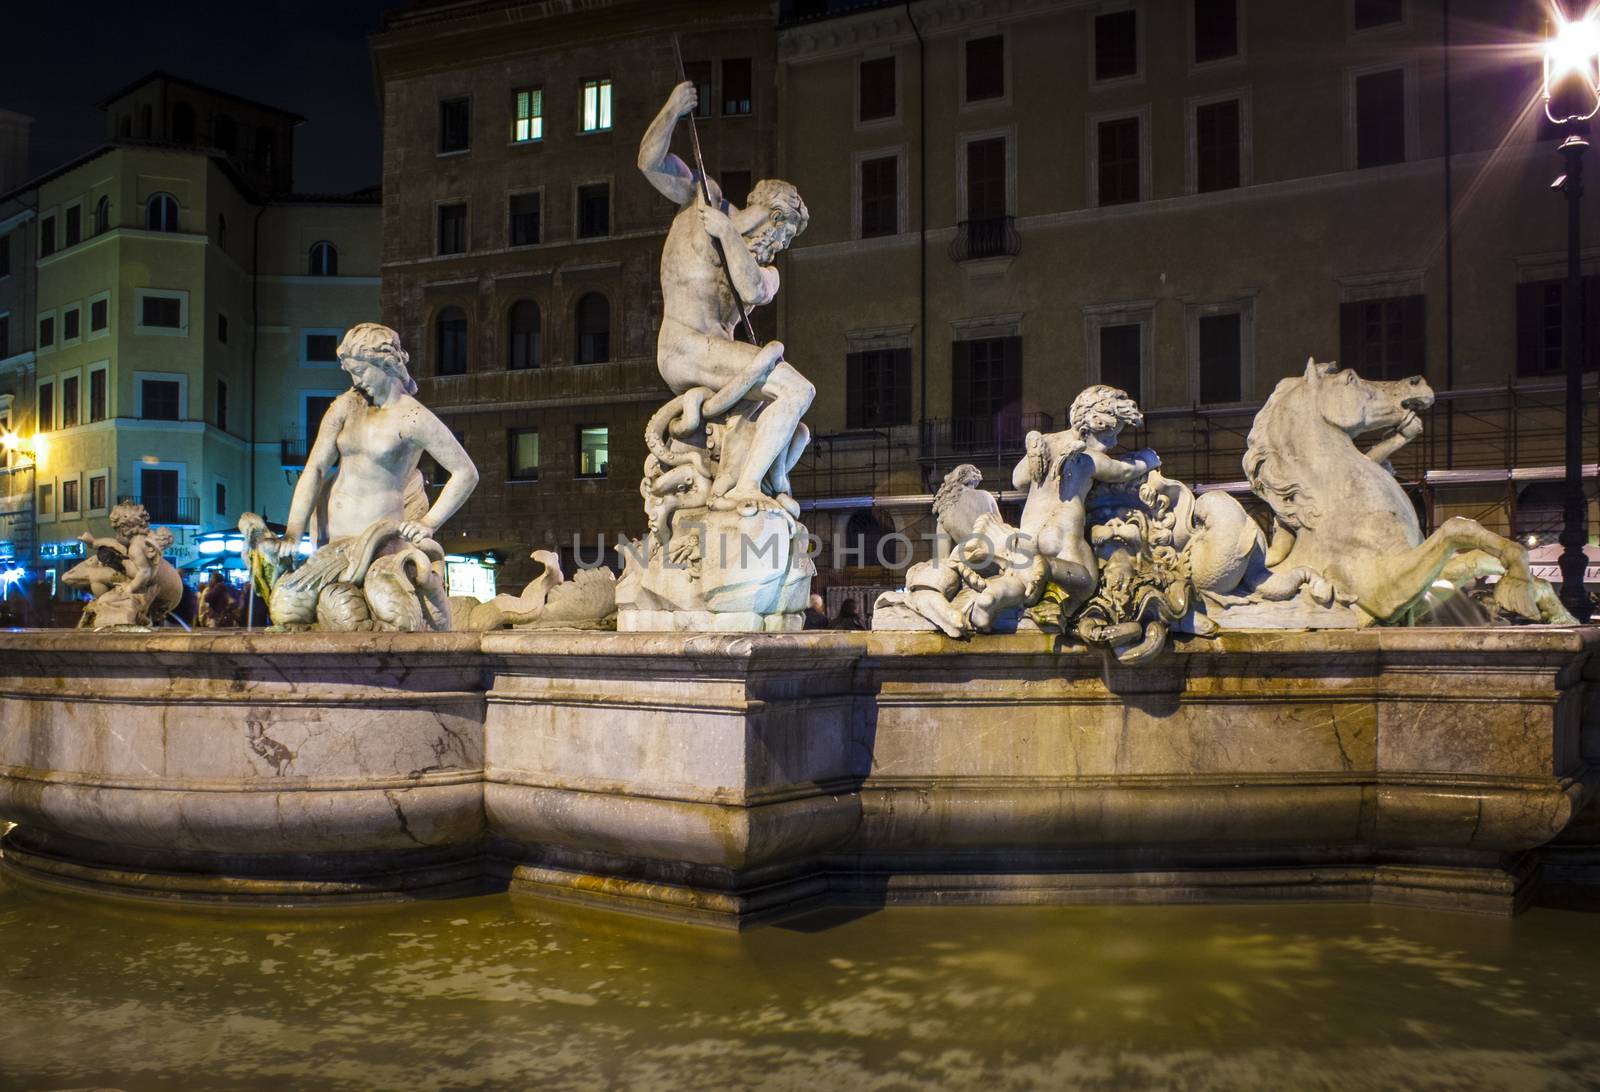 Piazza Navona is a square in Rome, Italy. It is built on the site of the Stadium of Domitian, built in 1st century AD. Fountain of the Moor or Fontana del Moro .Italy.